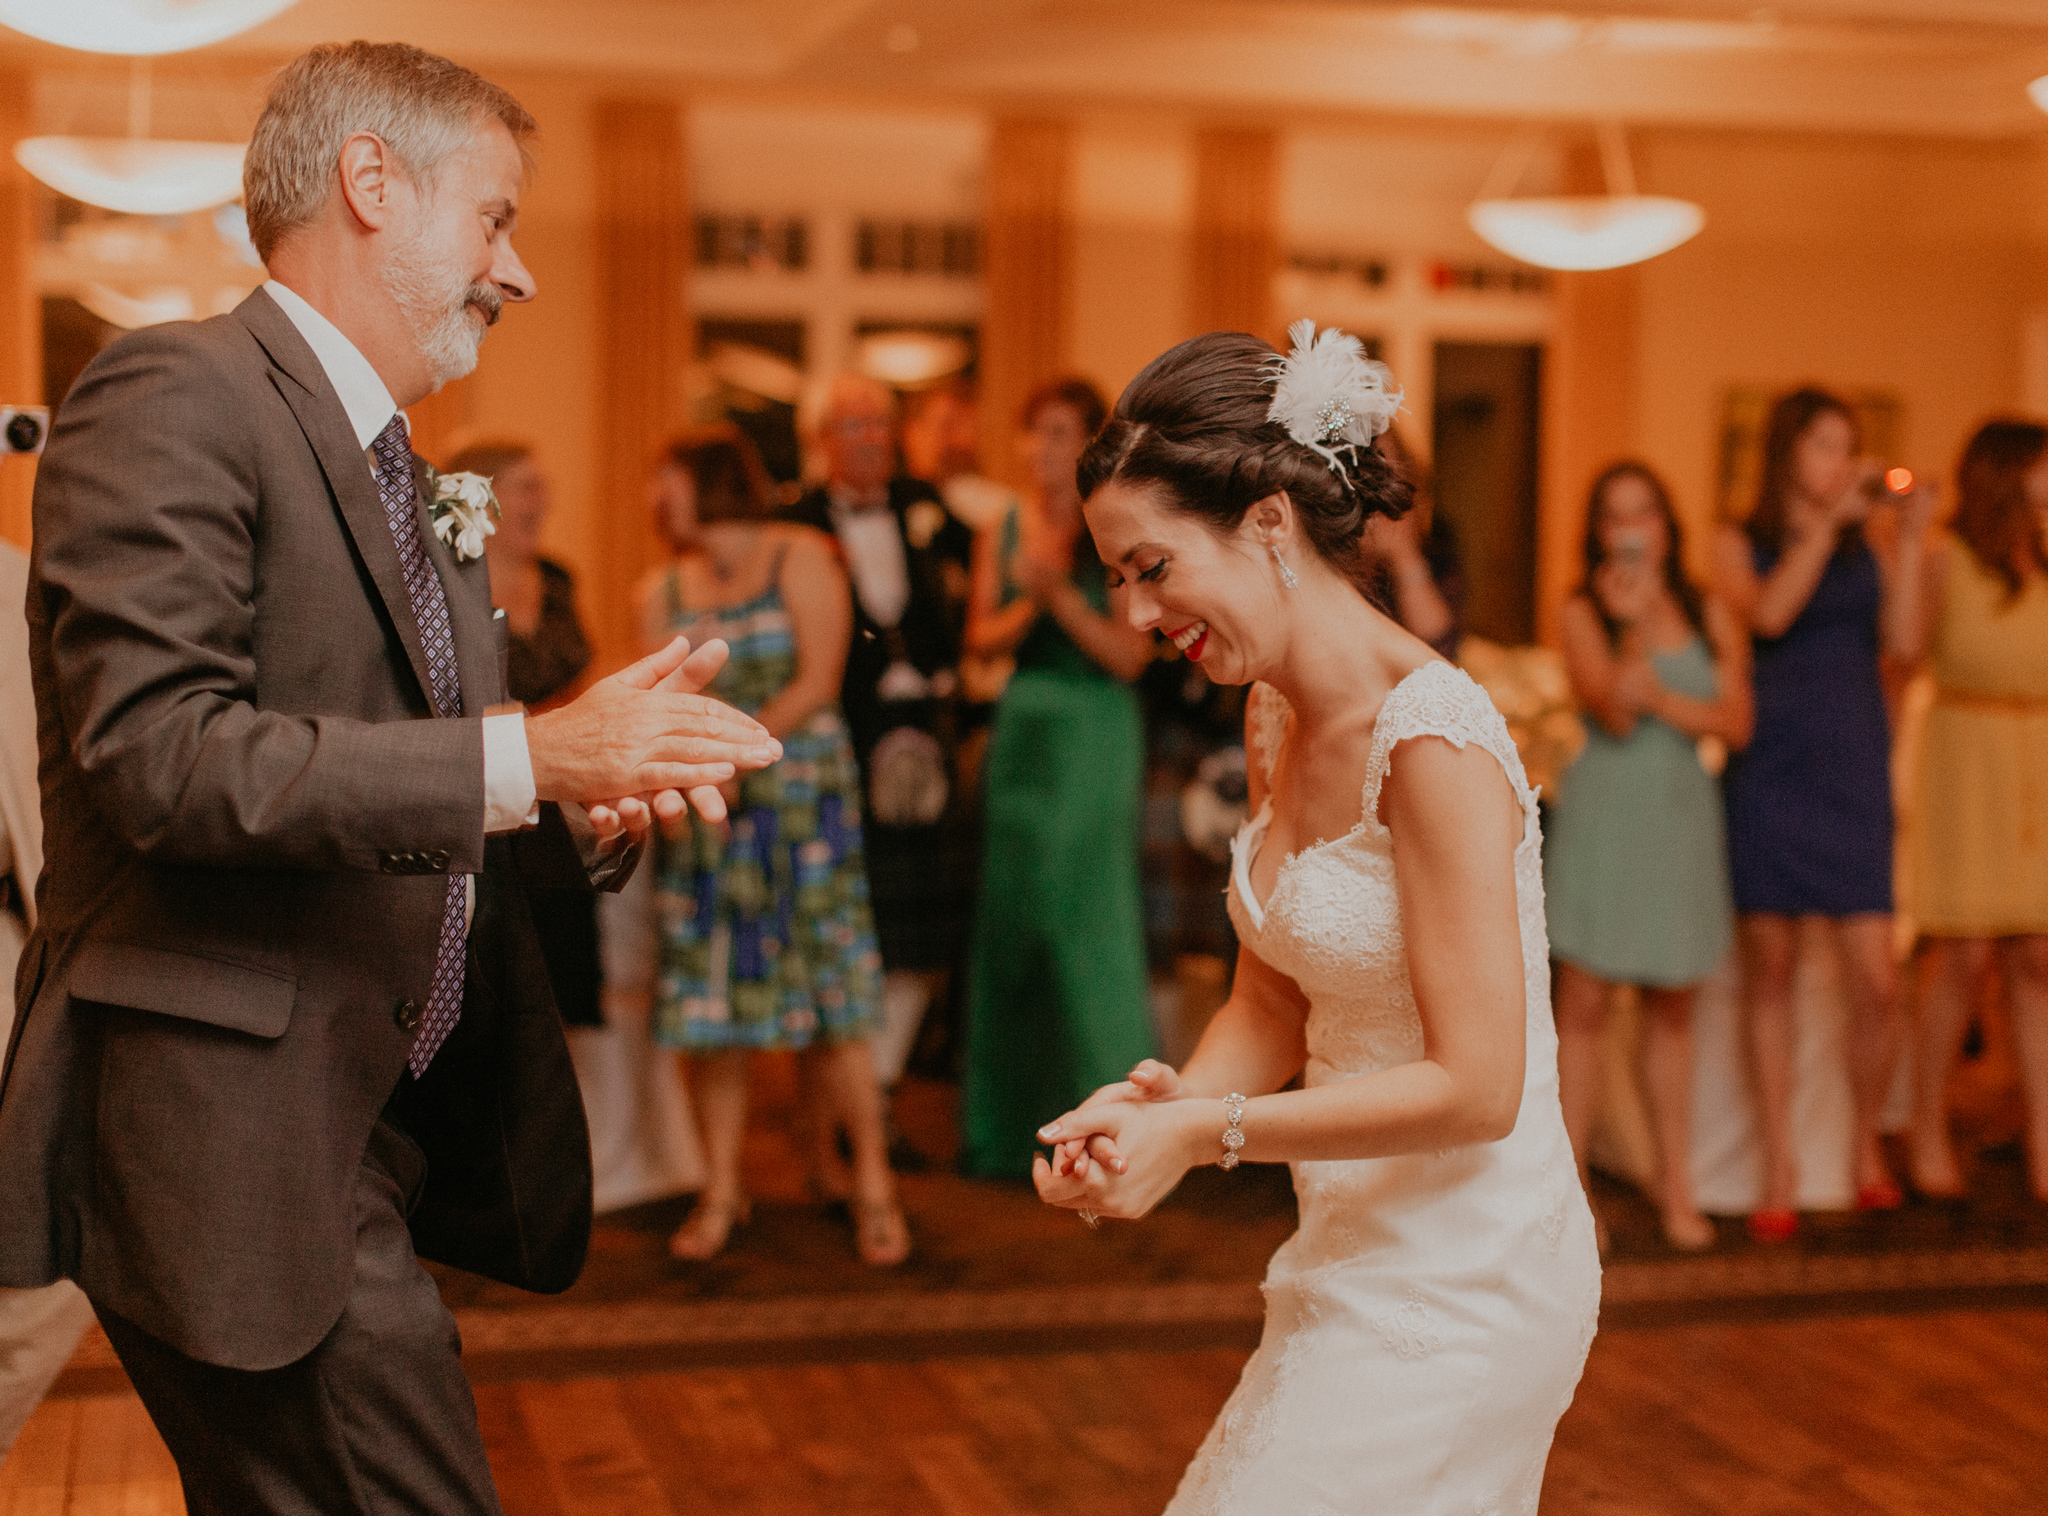 Bride smiles and has fun dancing with father during wedding